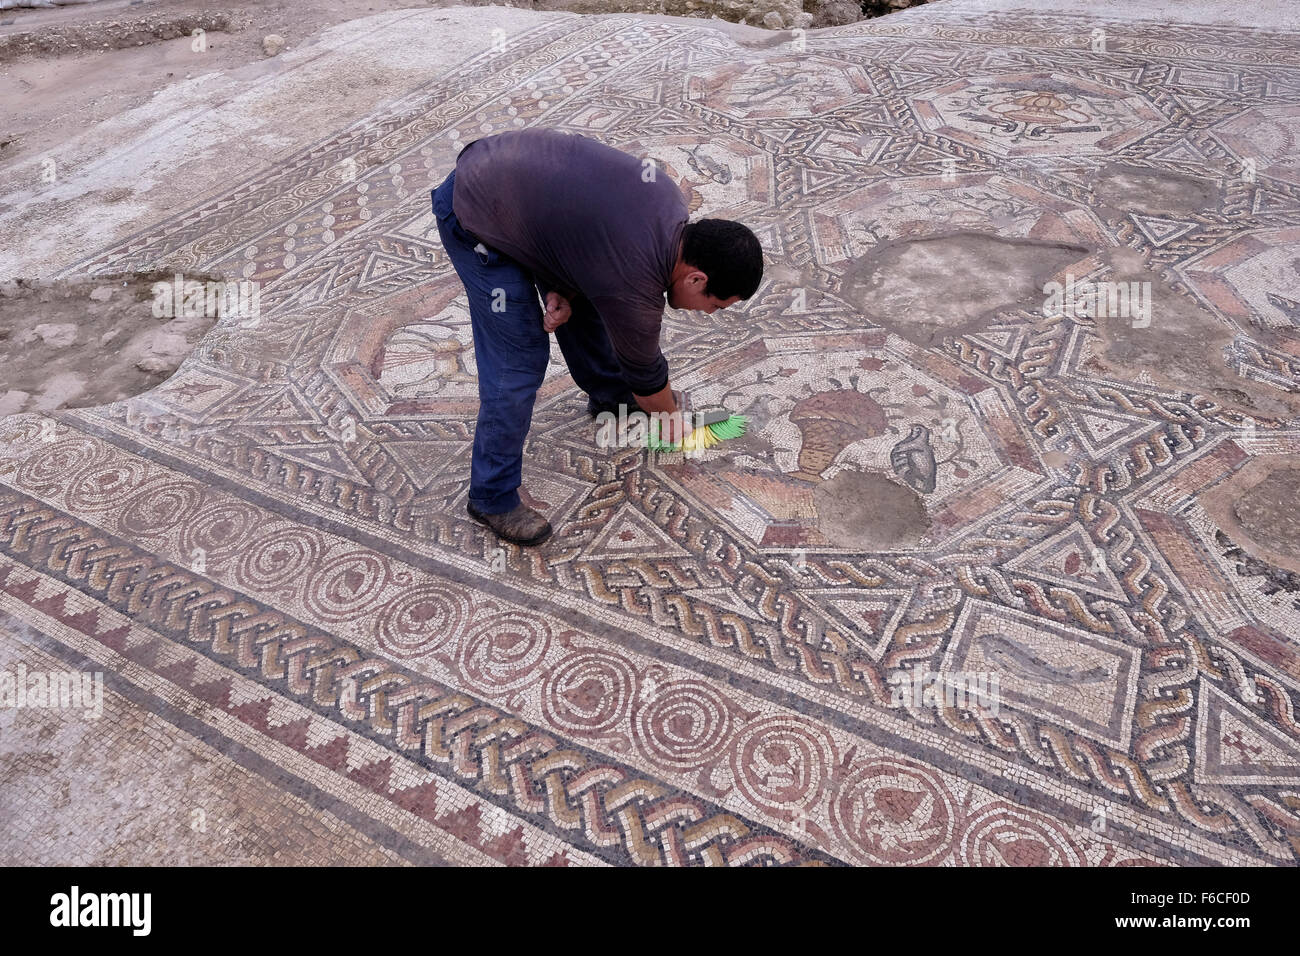 A worker of the Israel Antiquities Authority cleans a 1,700 year old mosaic, which served as pavement for the courtyard in a villa during the Roman and Byzantine periods in the Israeli central city of Lod Israel Stock Photo